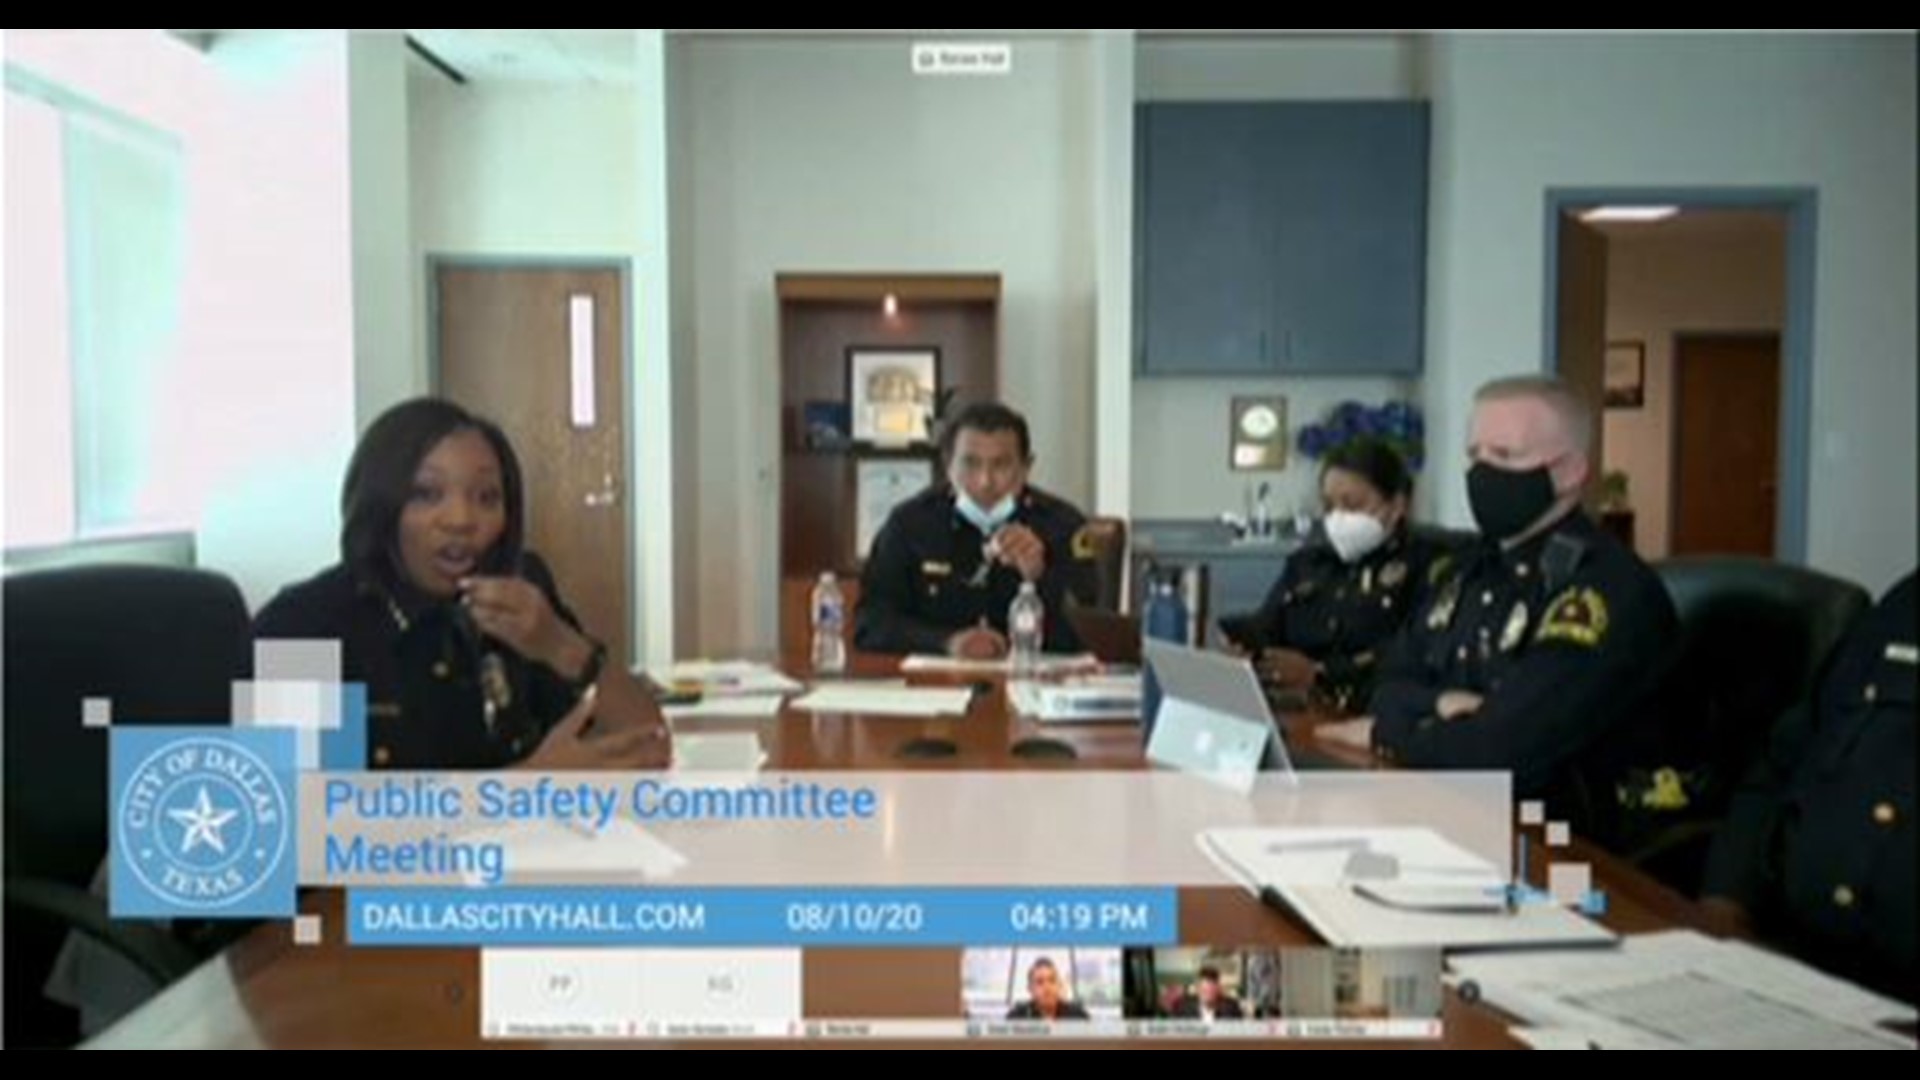 Chief Renee Hall and her leadership team briefed the Public Safety Committee on crime stats so far this year, and her presentation was met with mixed reviews.